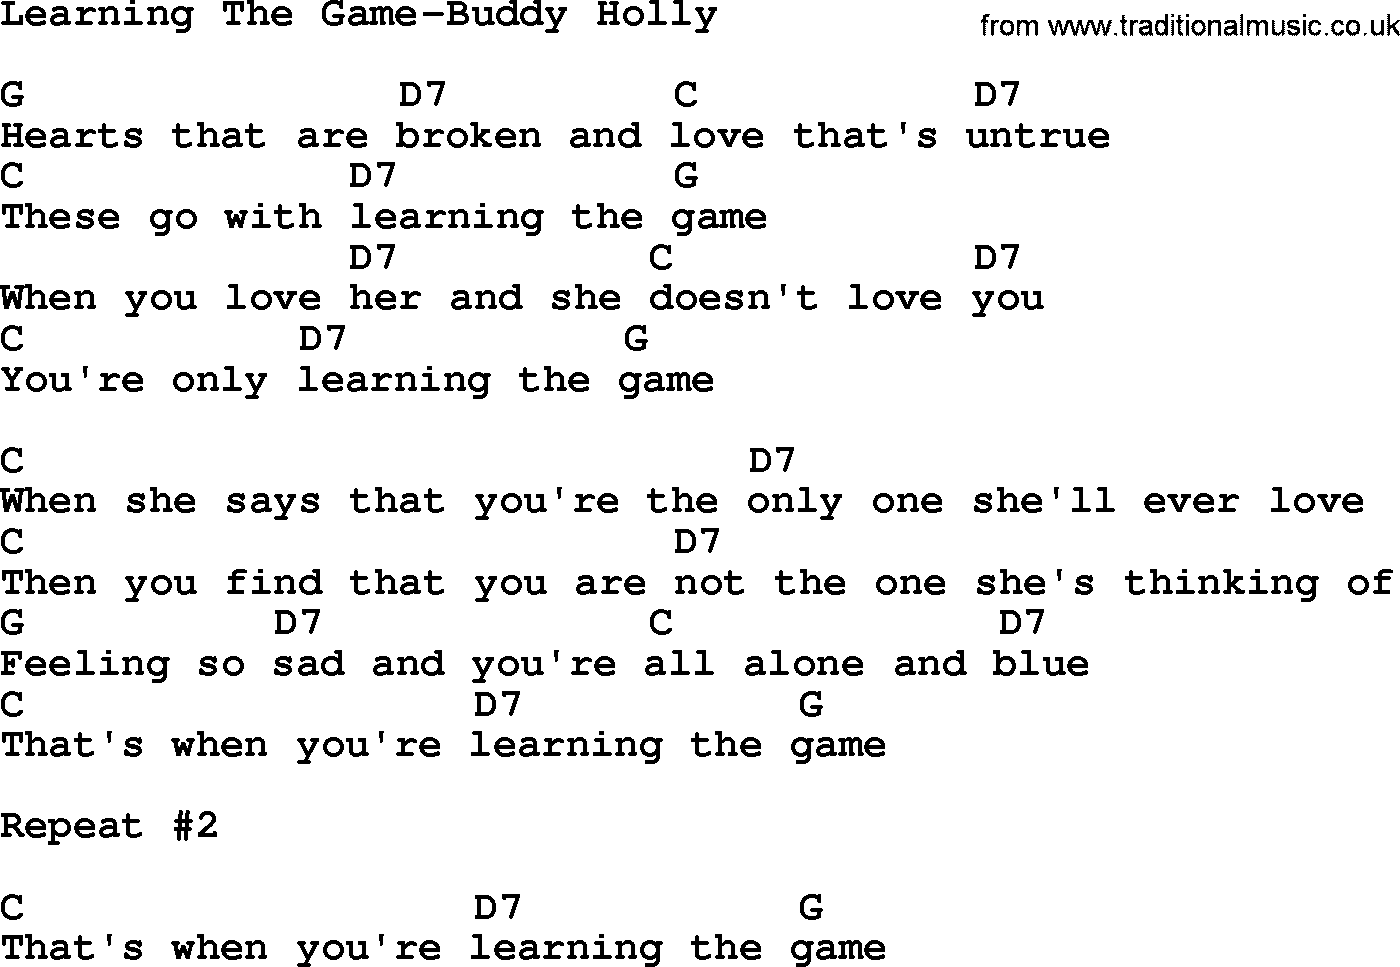 Country music song: Learning The Game-Buddy Holly lyrics and chords